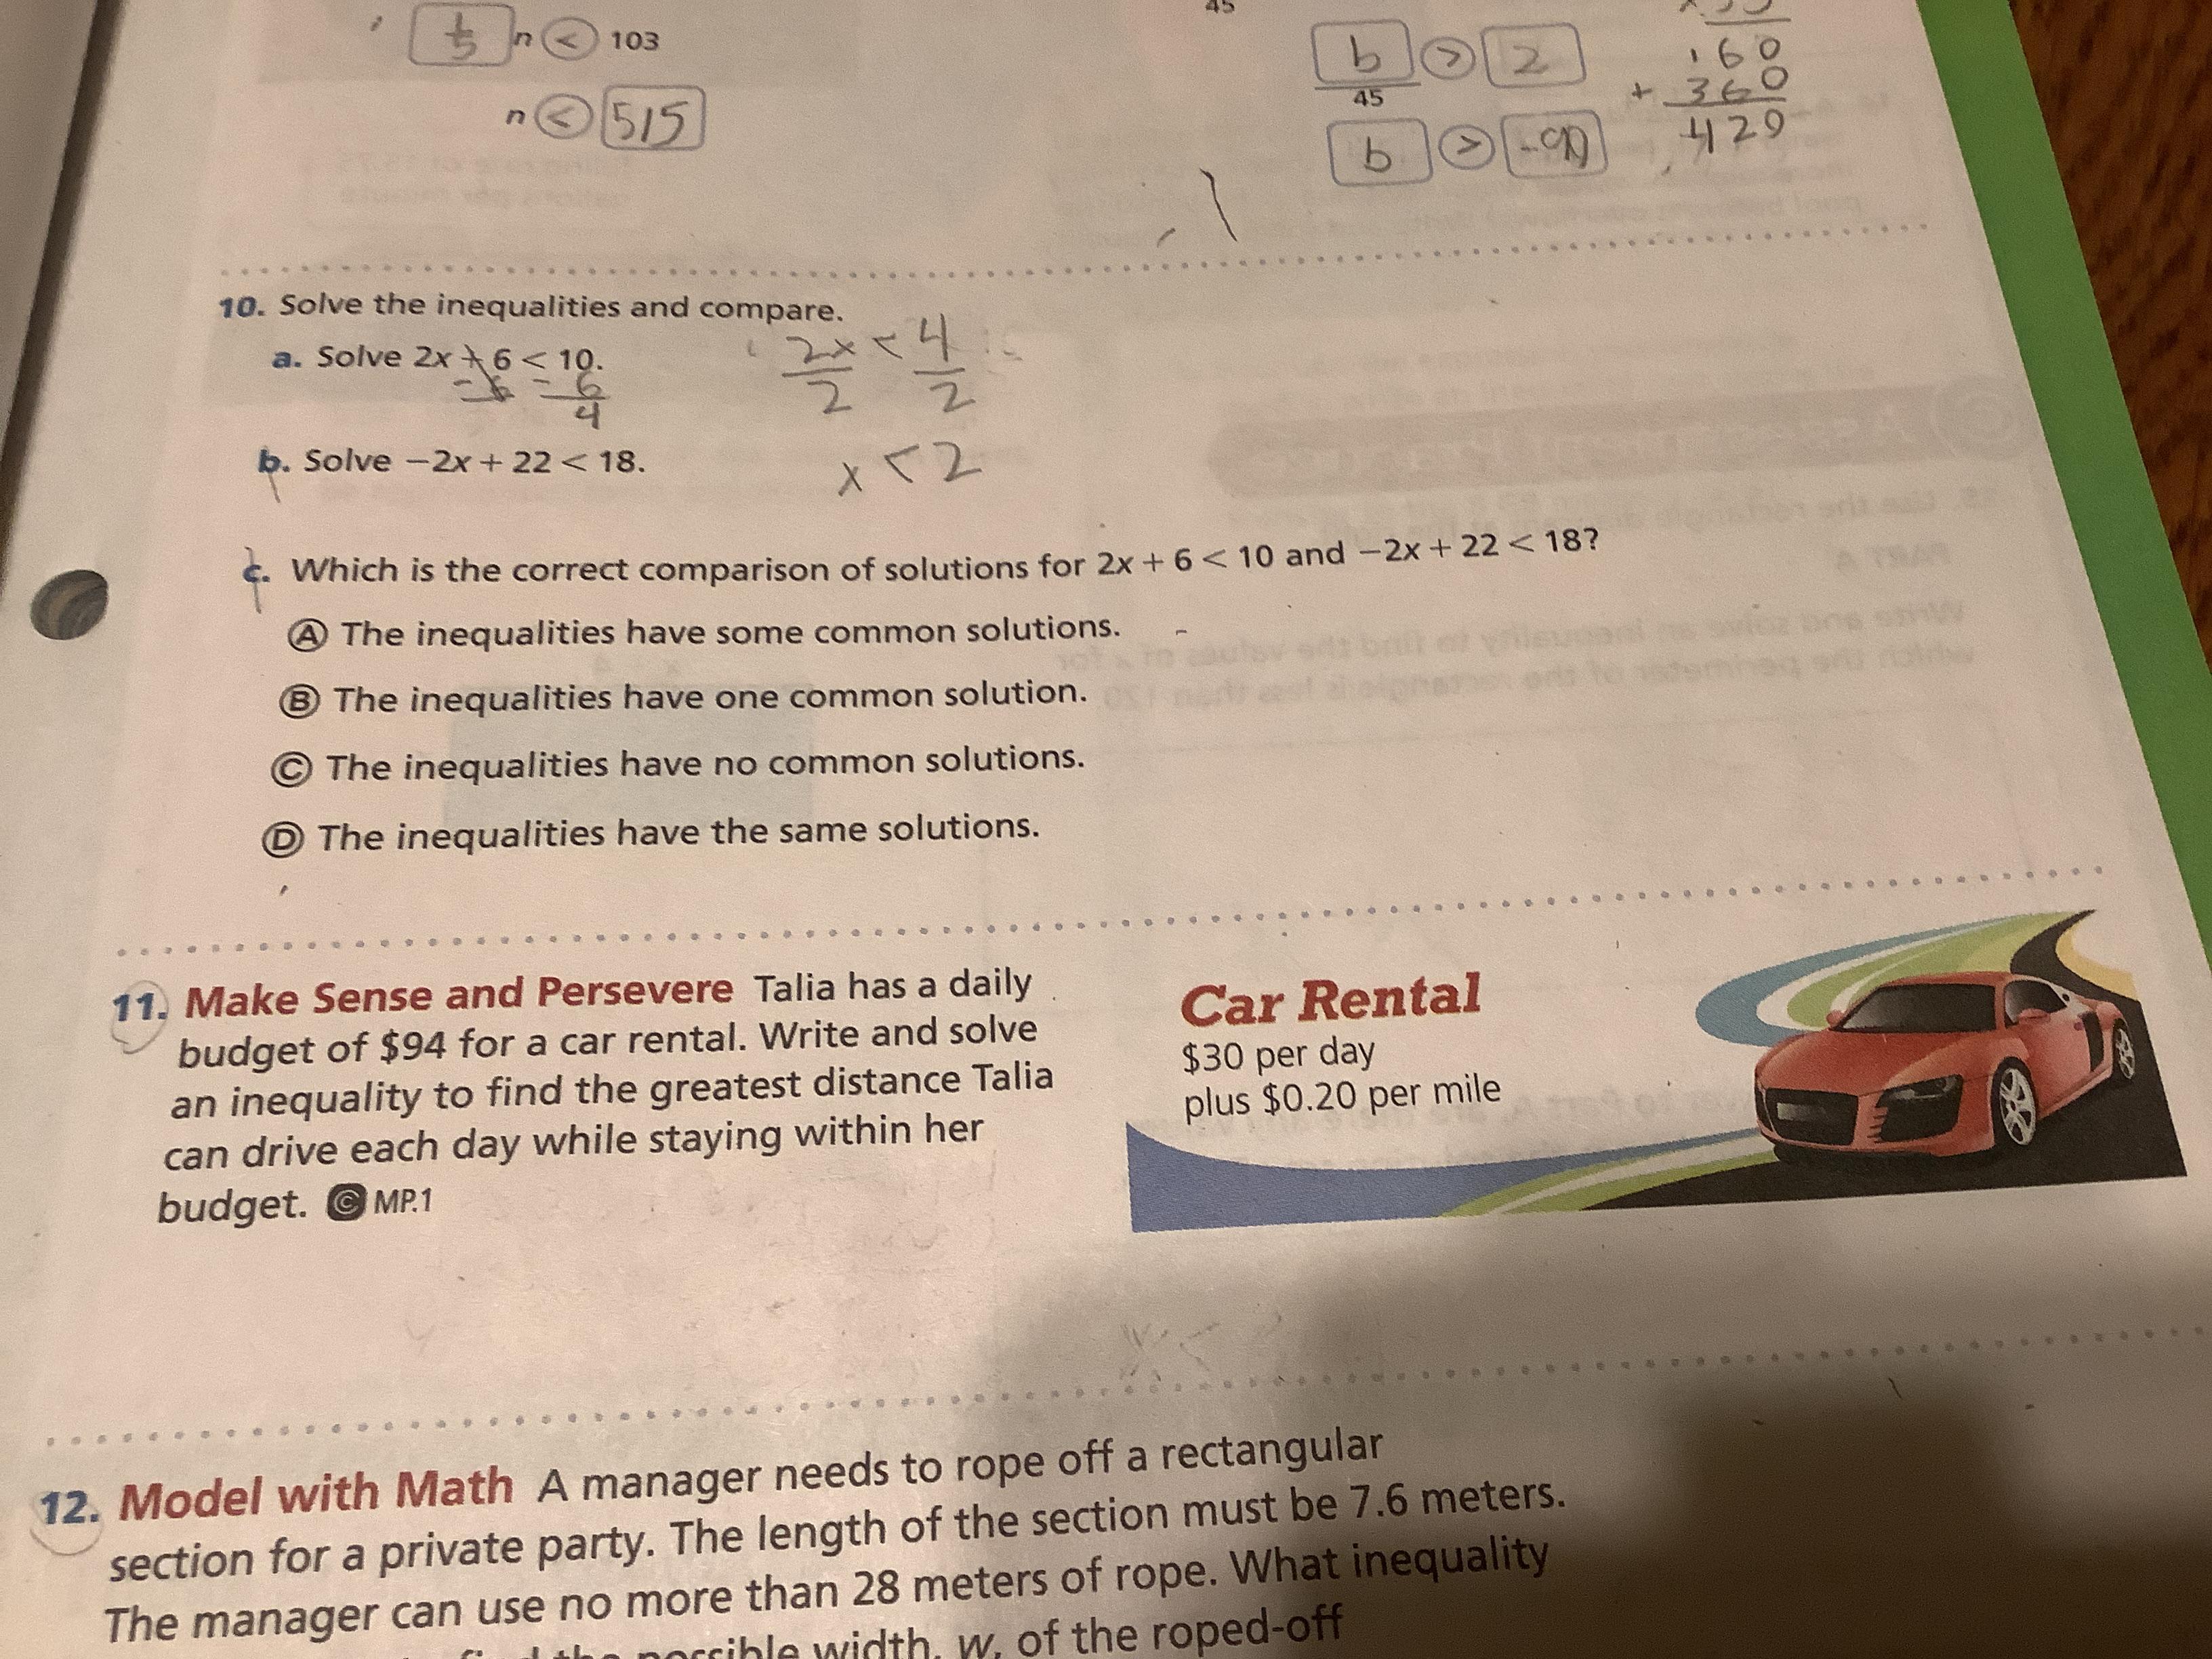 Talia Has A Daily Budget Of $94 For A Car Rental. Write And Solve An Inequality To Find The Greatest